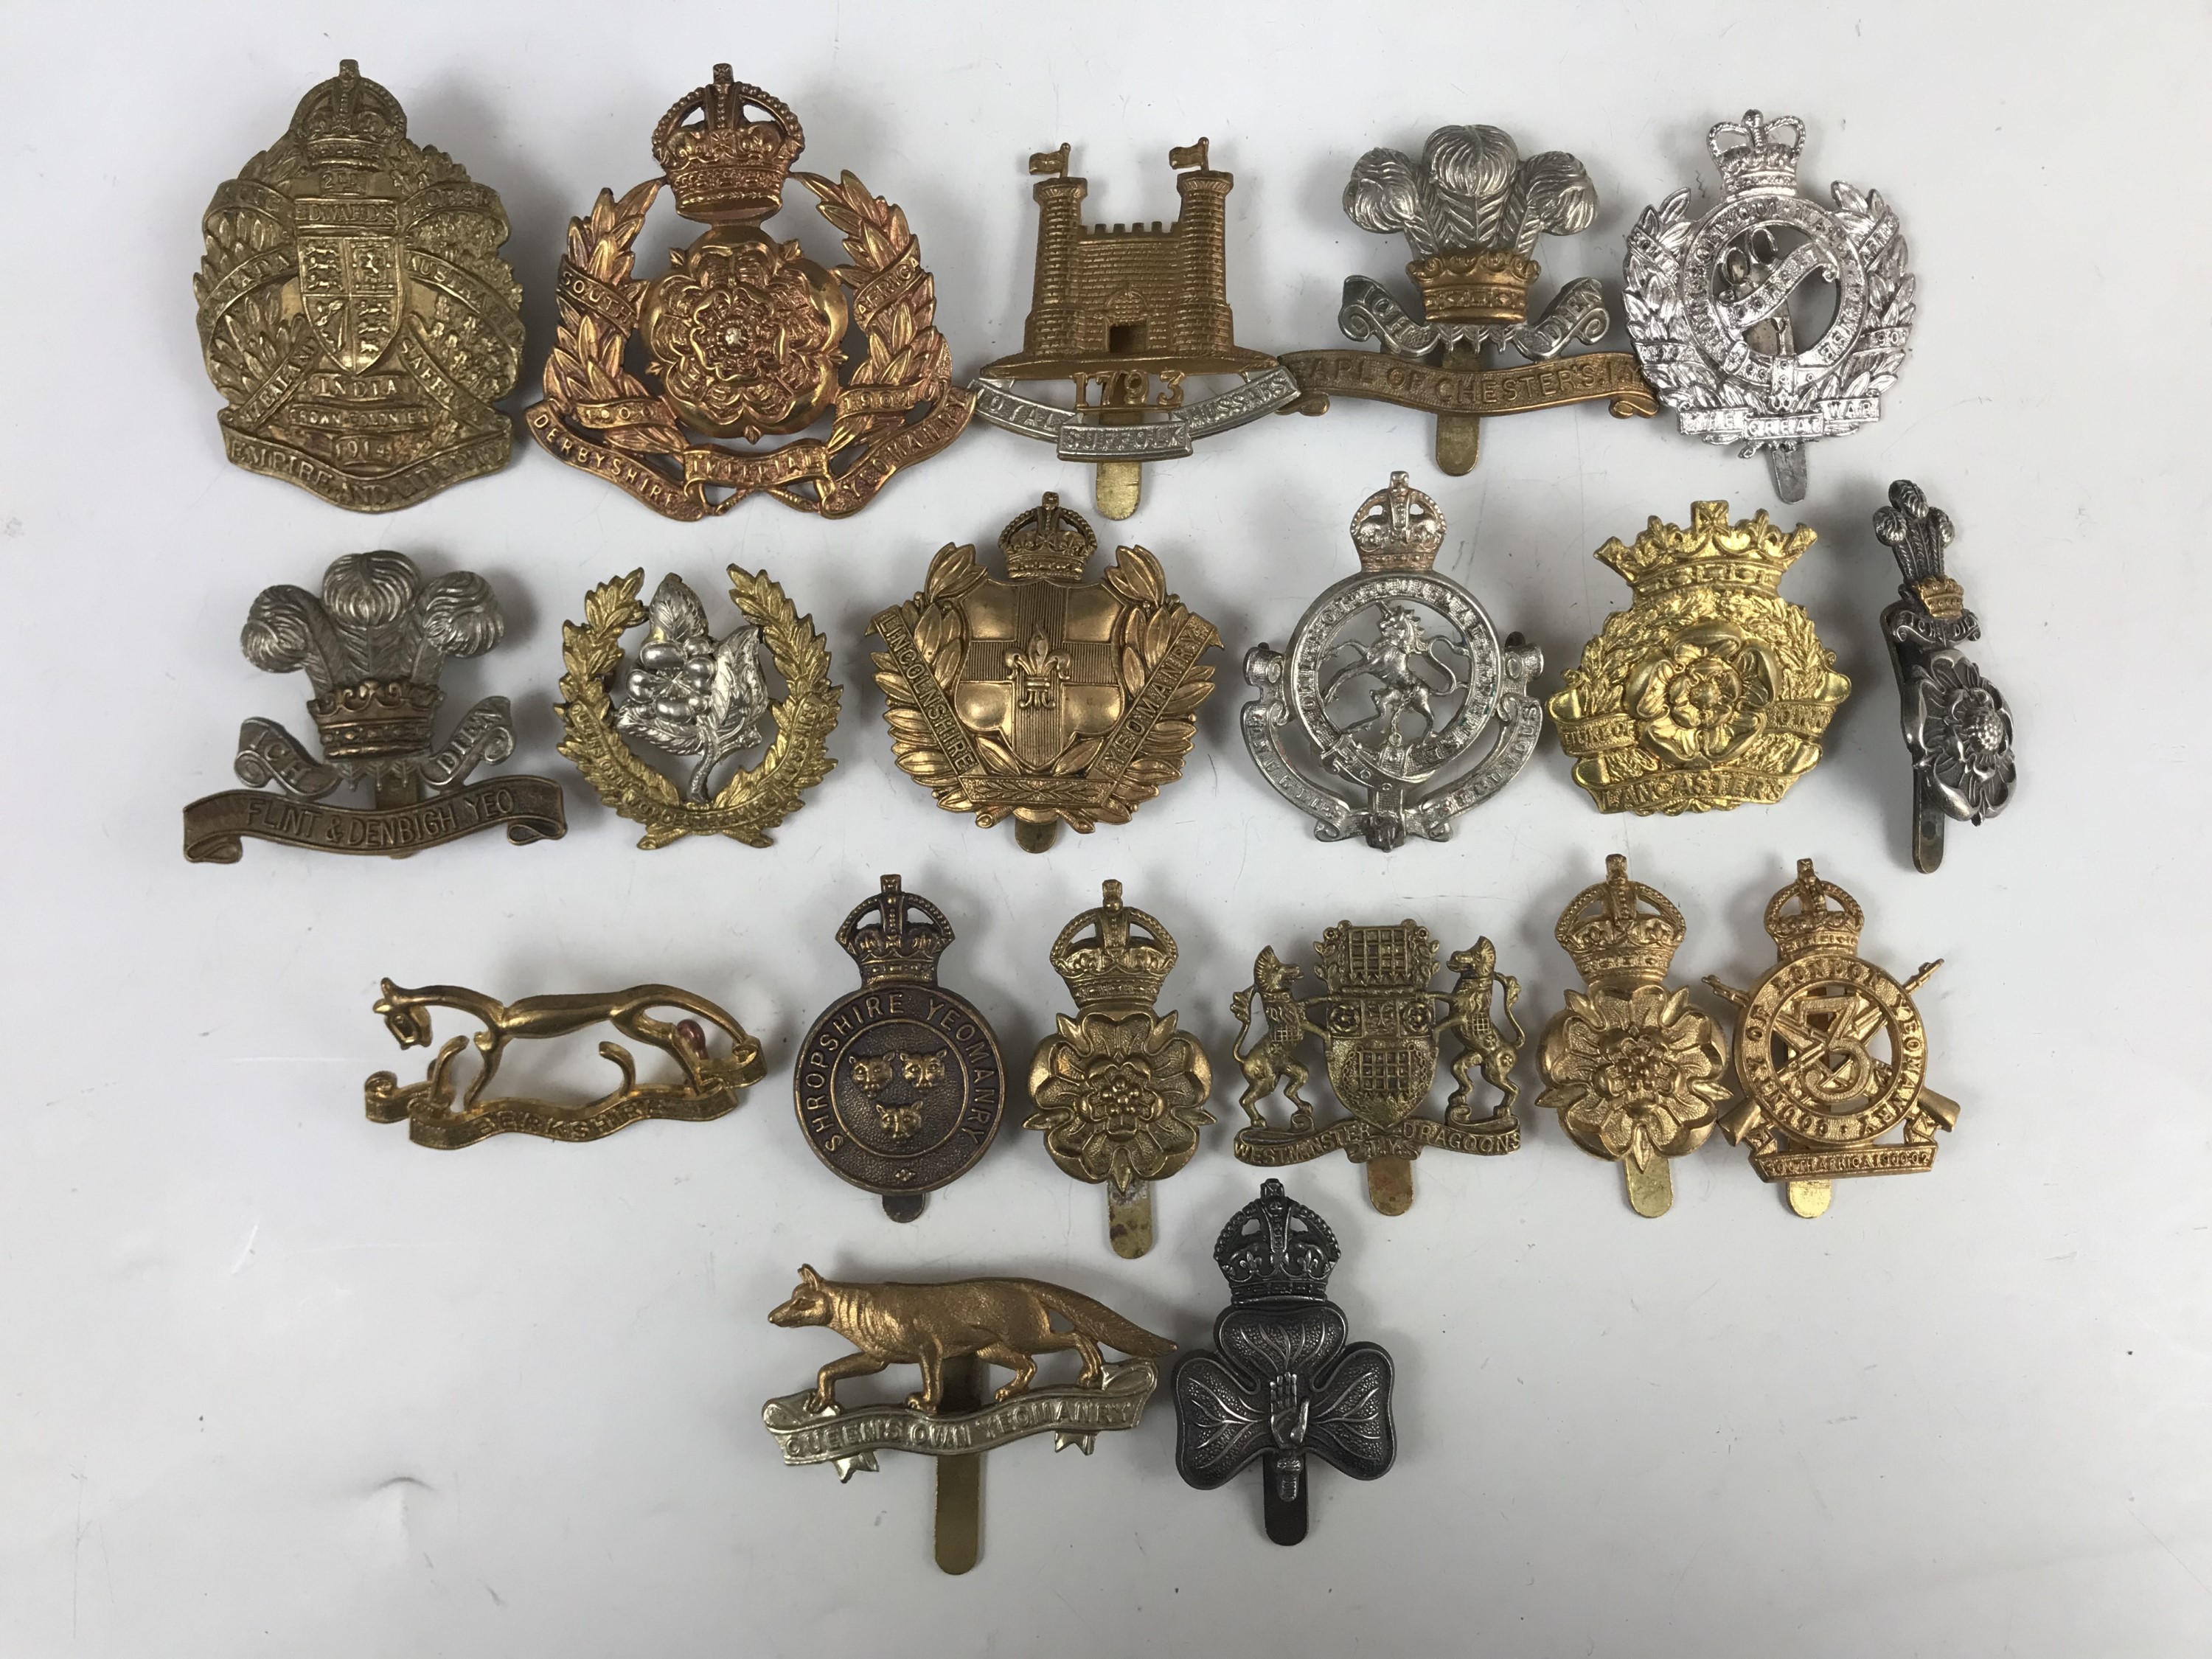 Cavalry cap and other badges